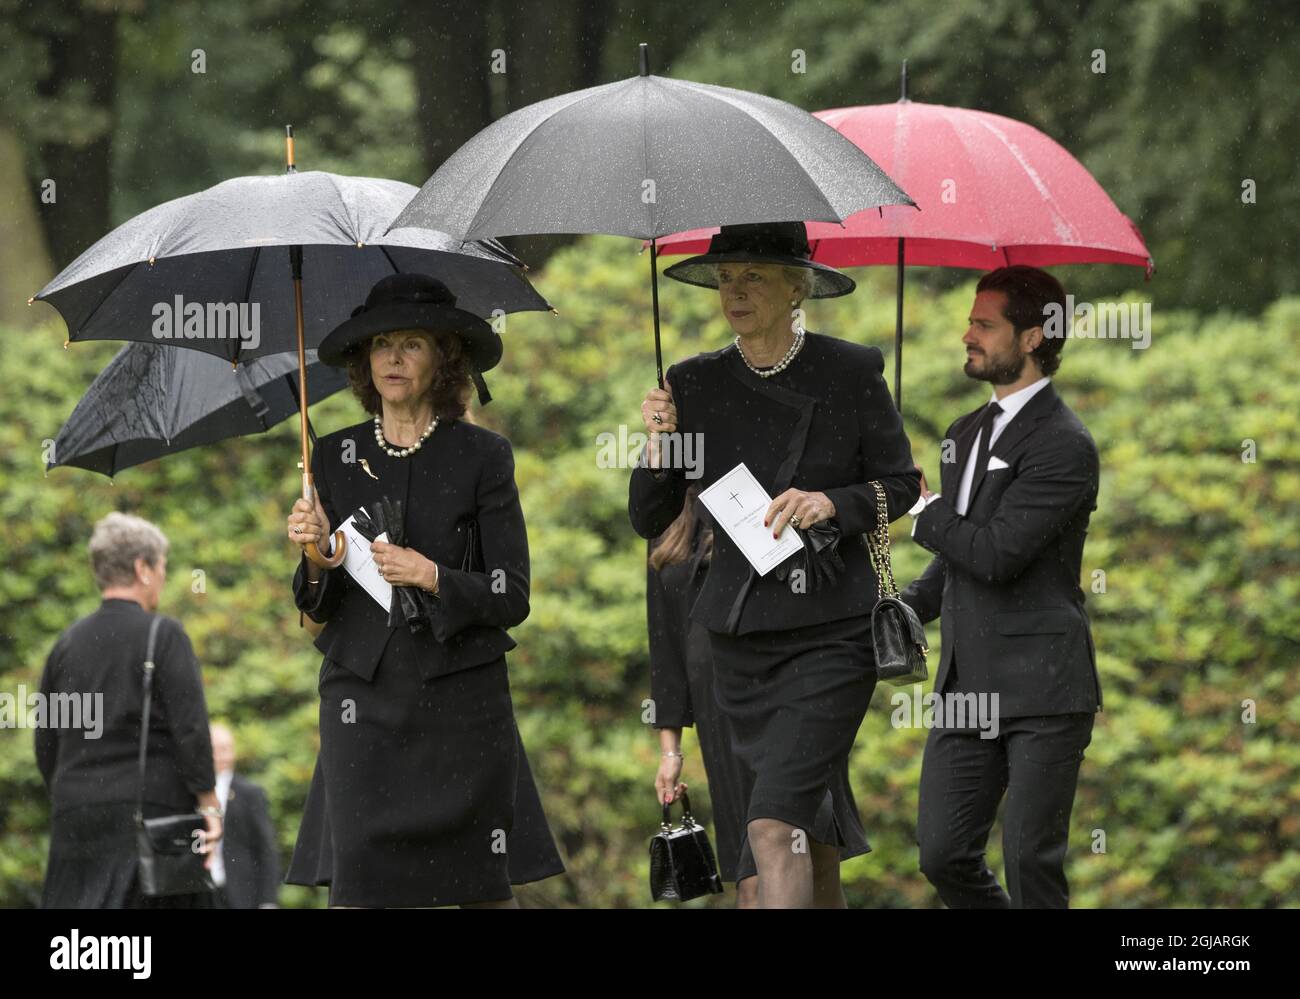 TROLLE LJUNGBY 2017-07-12 Queen Silvia and Princess Benedikte of Denmark after the funeral ceremony for countess Alice Trolle-Wachtmeister at the Trolle Ljungby church in south of Sweden. Prince Carl Philip at right. Foto: Johan Nilsson / TT / kod 50090  Stock Photo